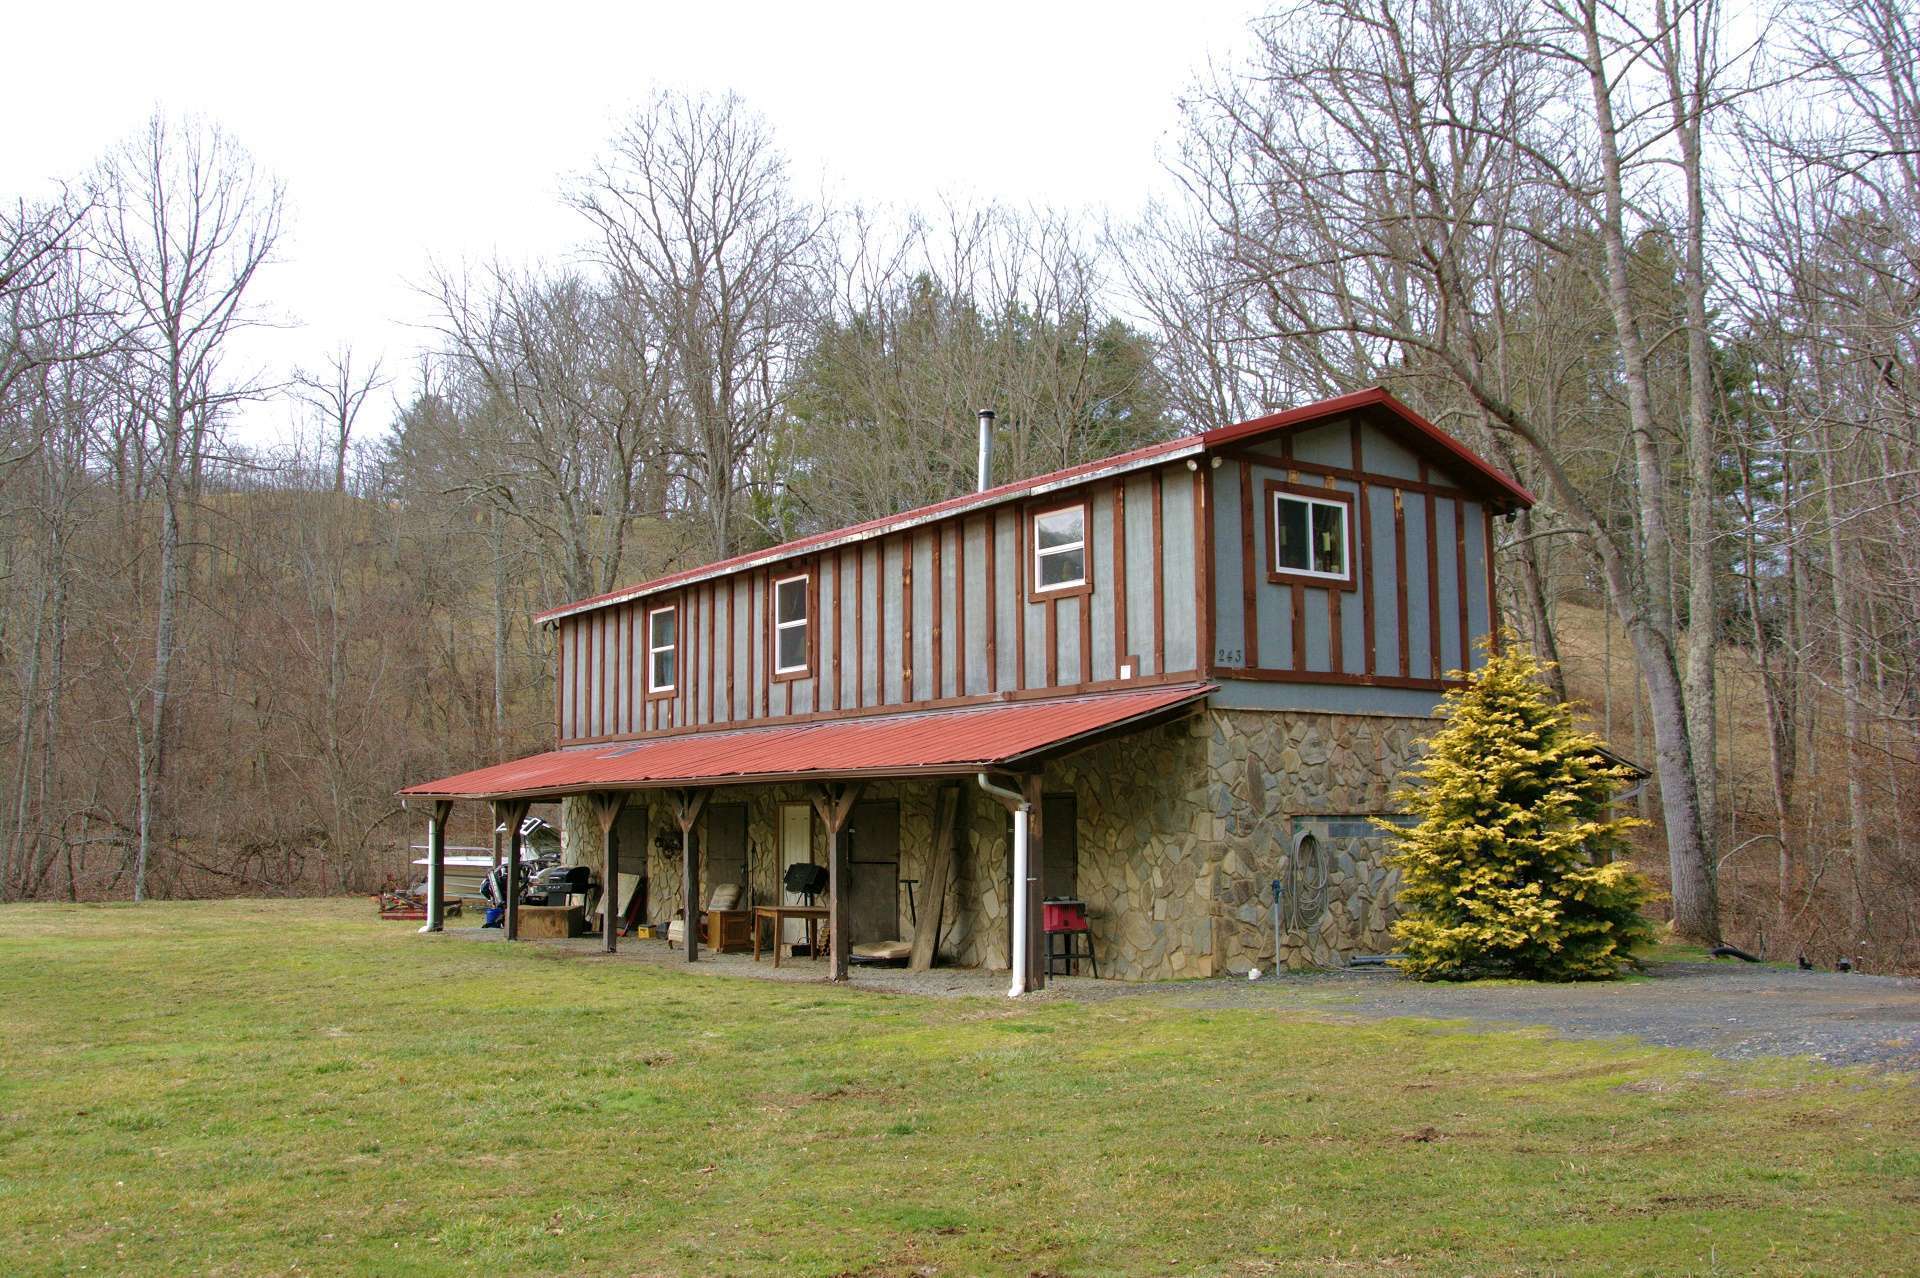 One of the barns has finished living quarters overhead for guests or bunkhouse.